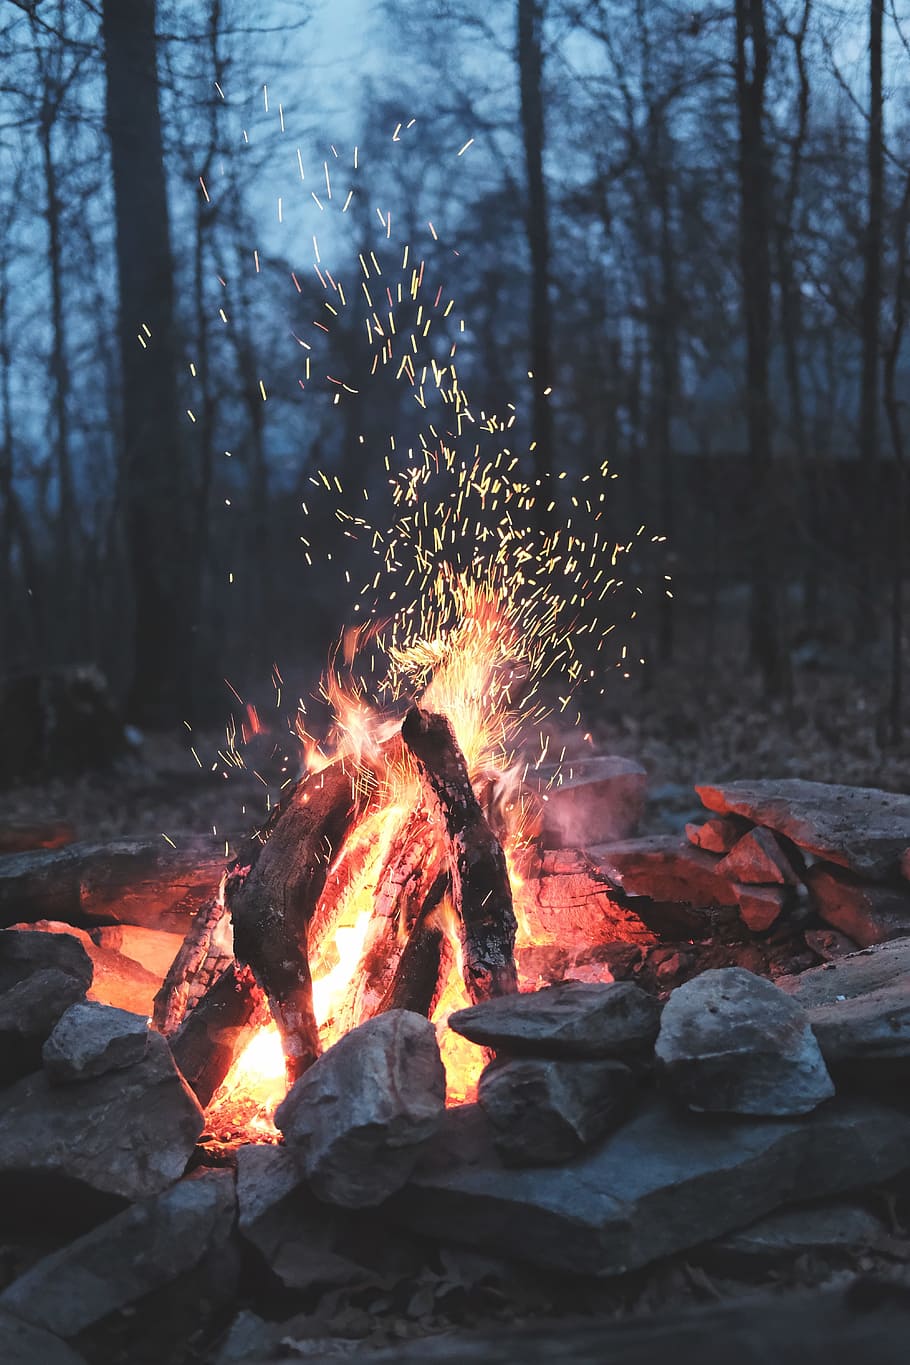 shallow, focus photography, bonfire, nature, fire, camp, outdoor, woods, forest, spark